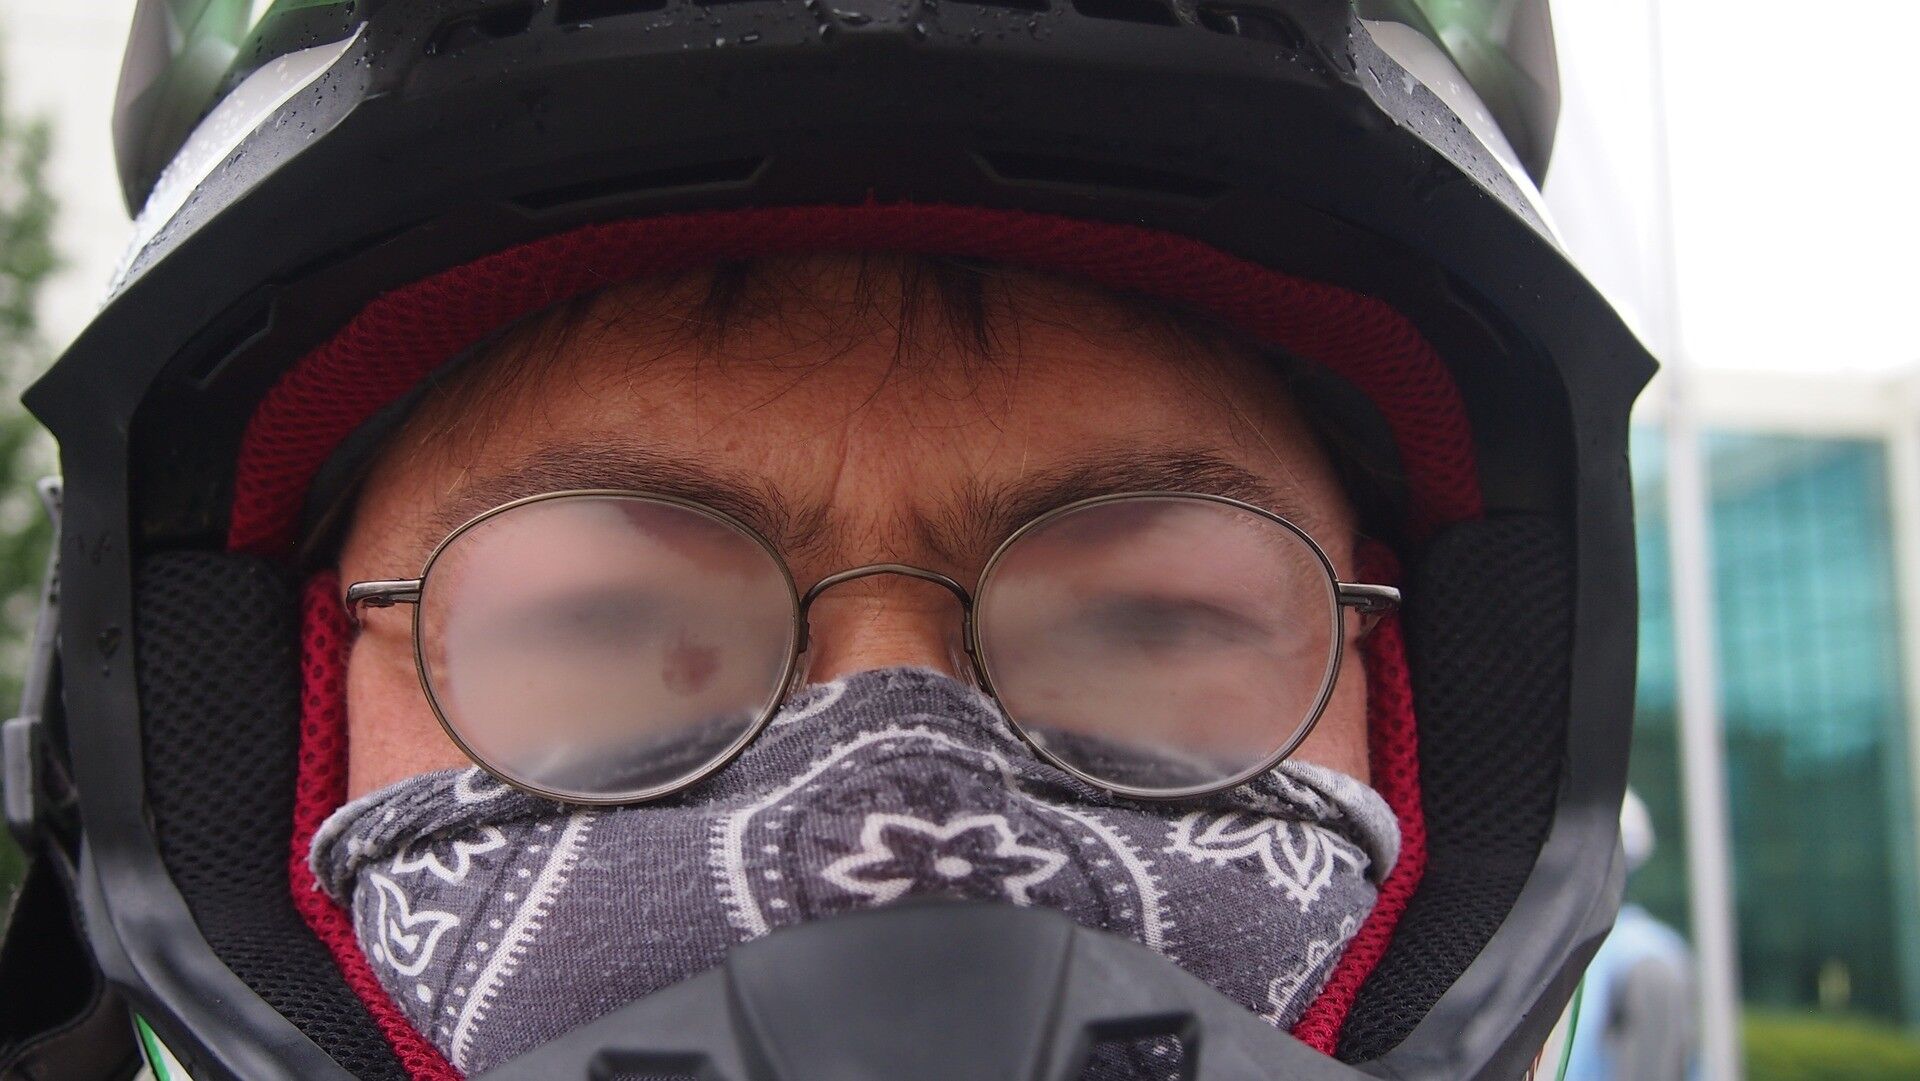 A man wearing a motocycle helment with foggy glasses